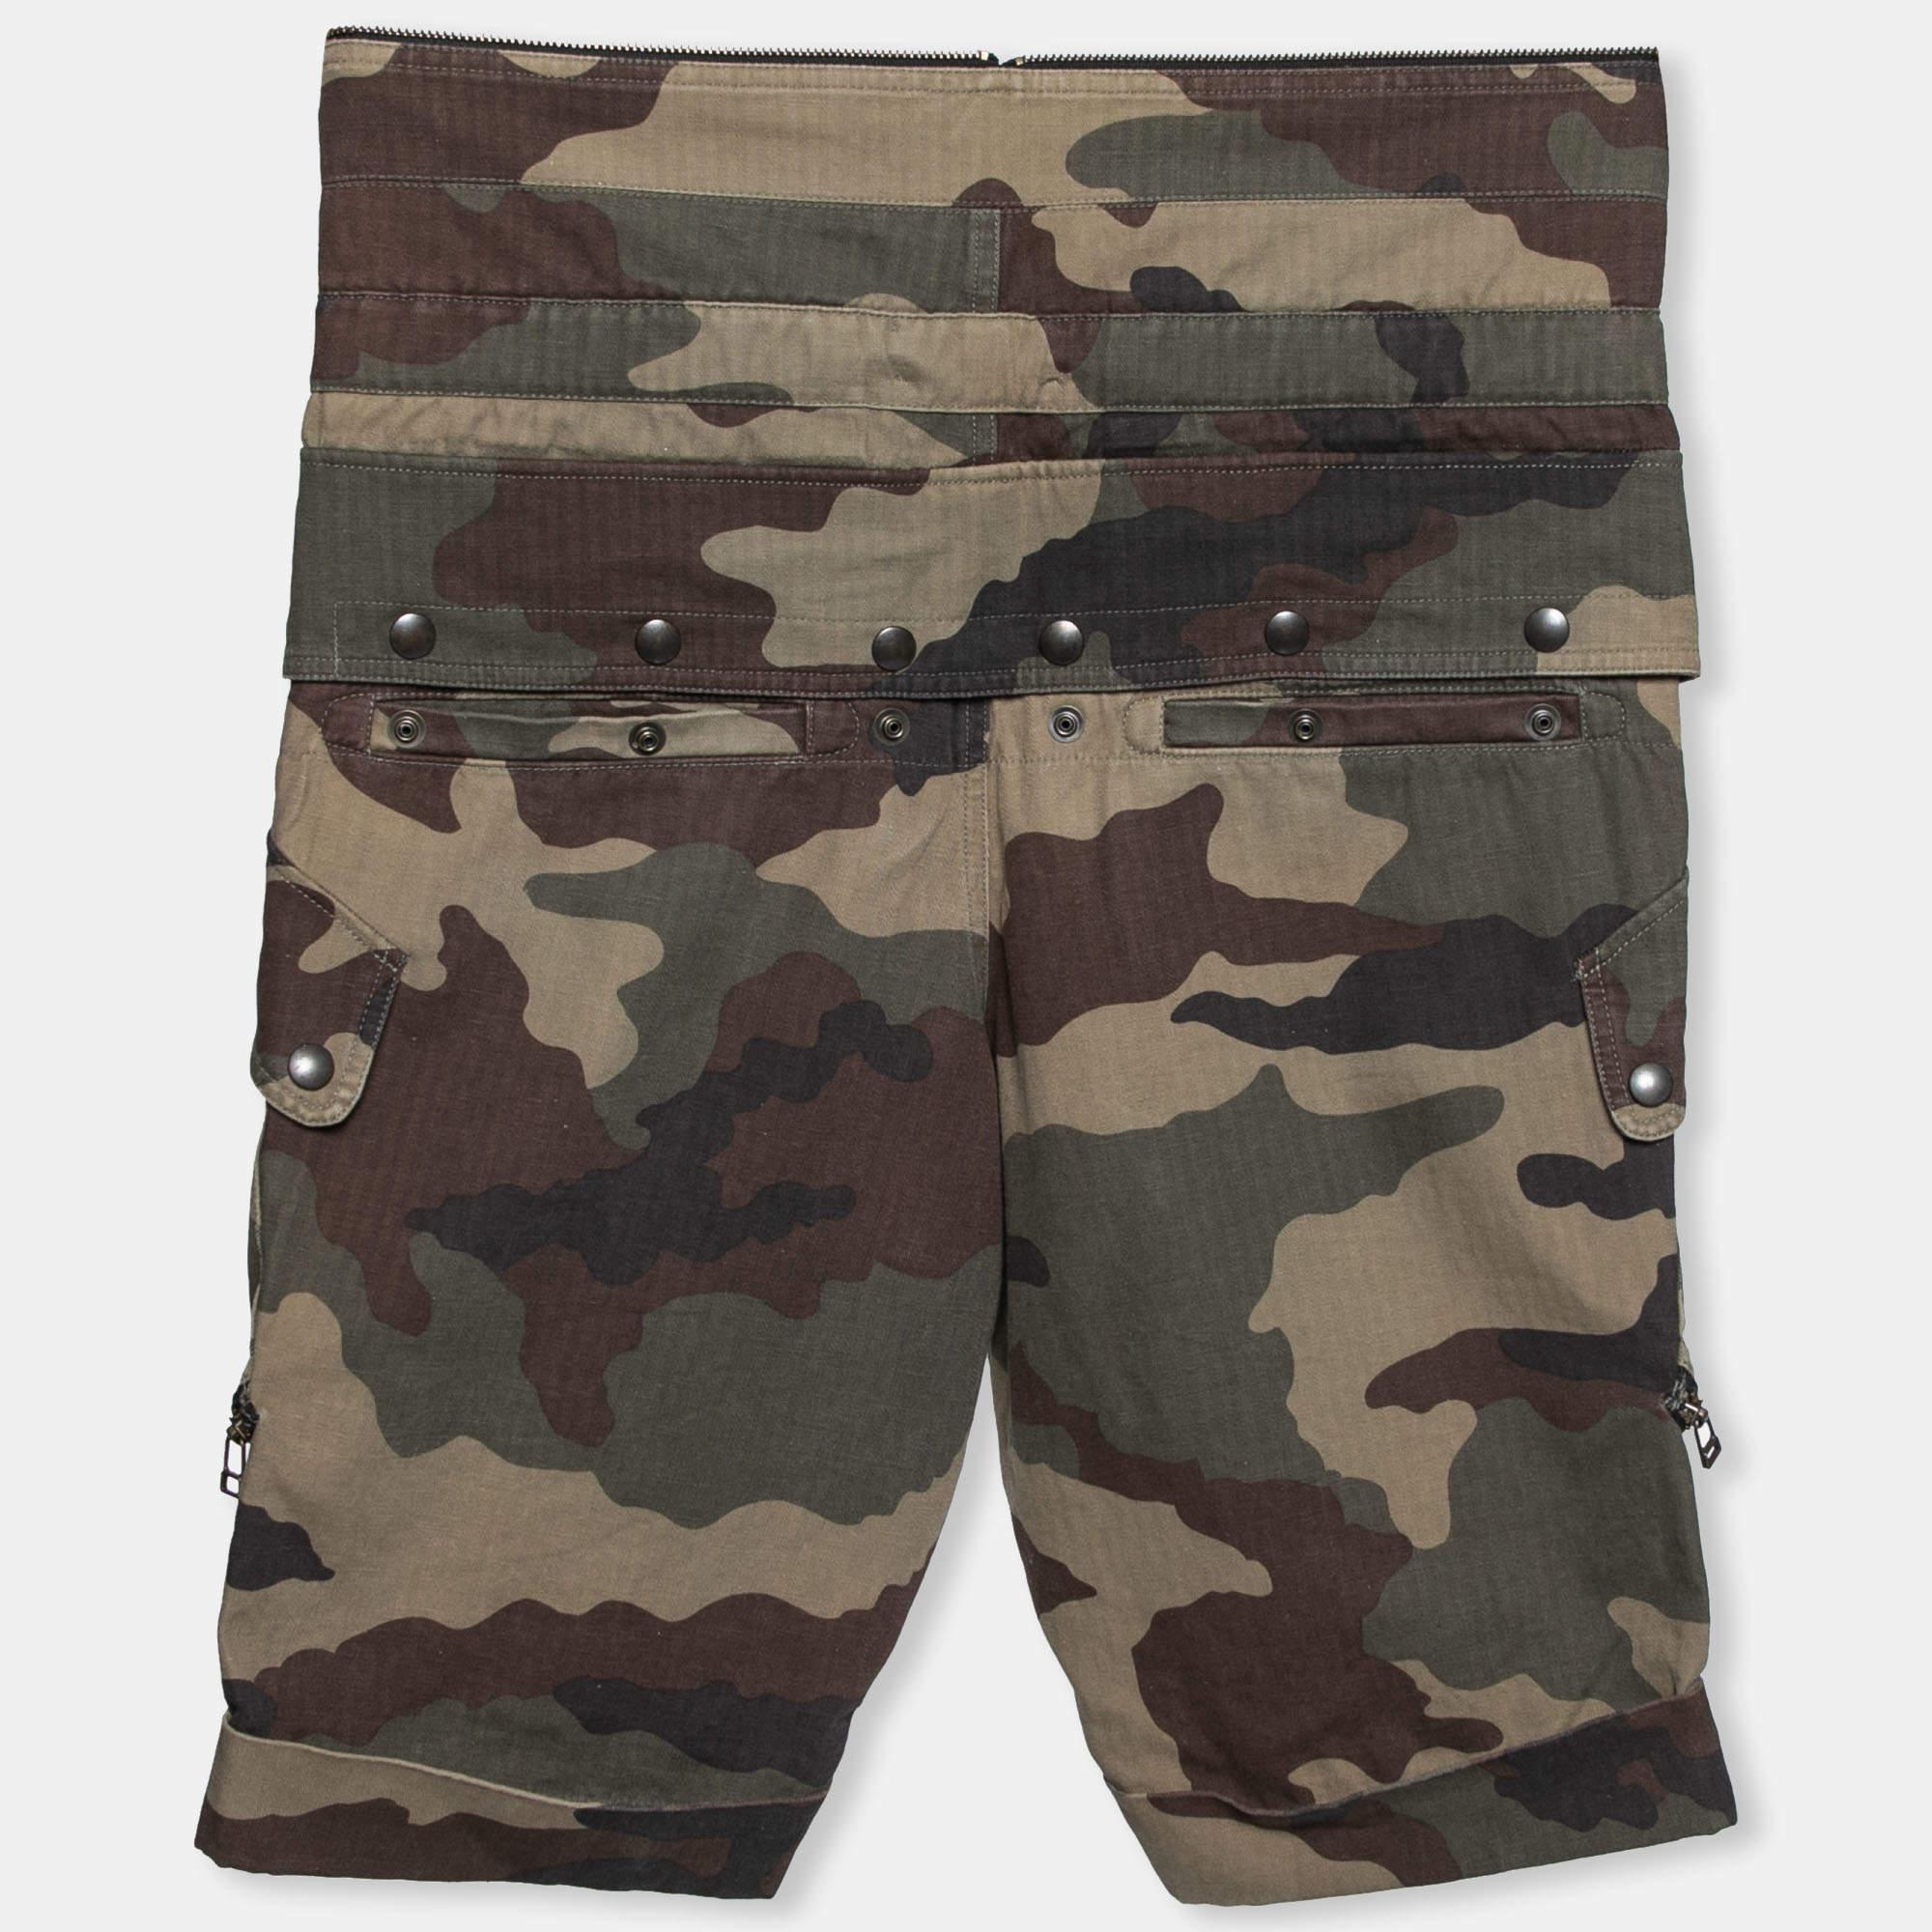 These shorts from Faith Connexion will help you spend the day comfortably and stylishly. They are made from Camouflage printed cotton and showcase rolled-up cuffs. These shorts are provided with a zipper fastening. Update your collection with these